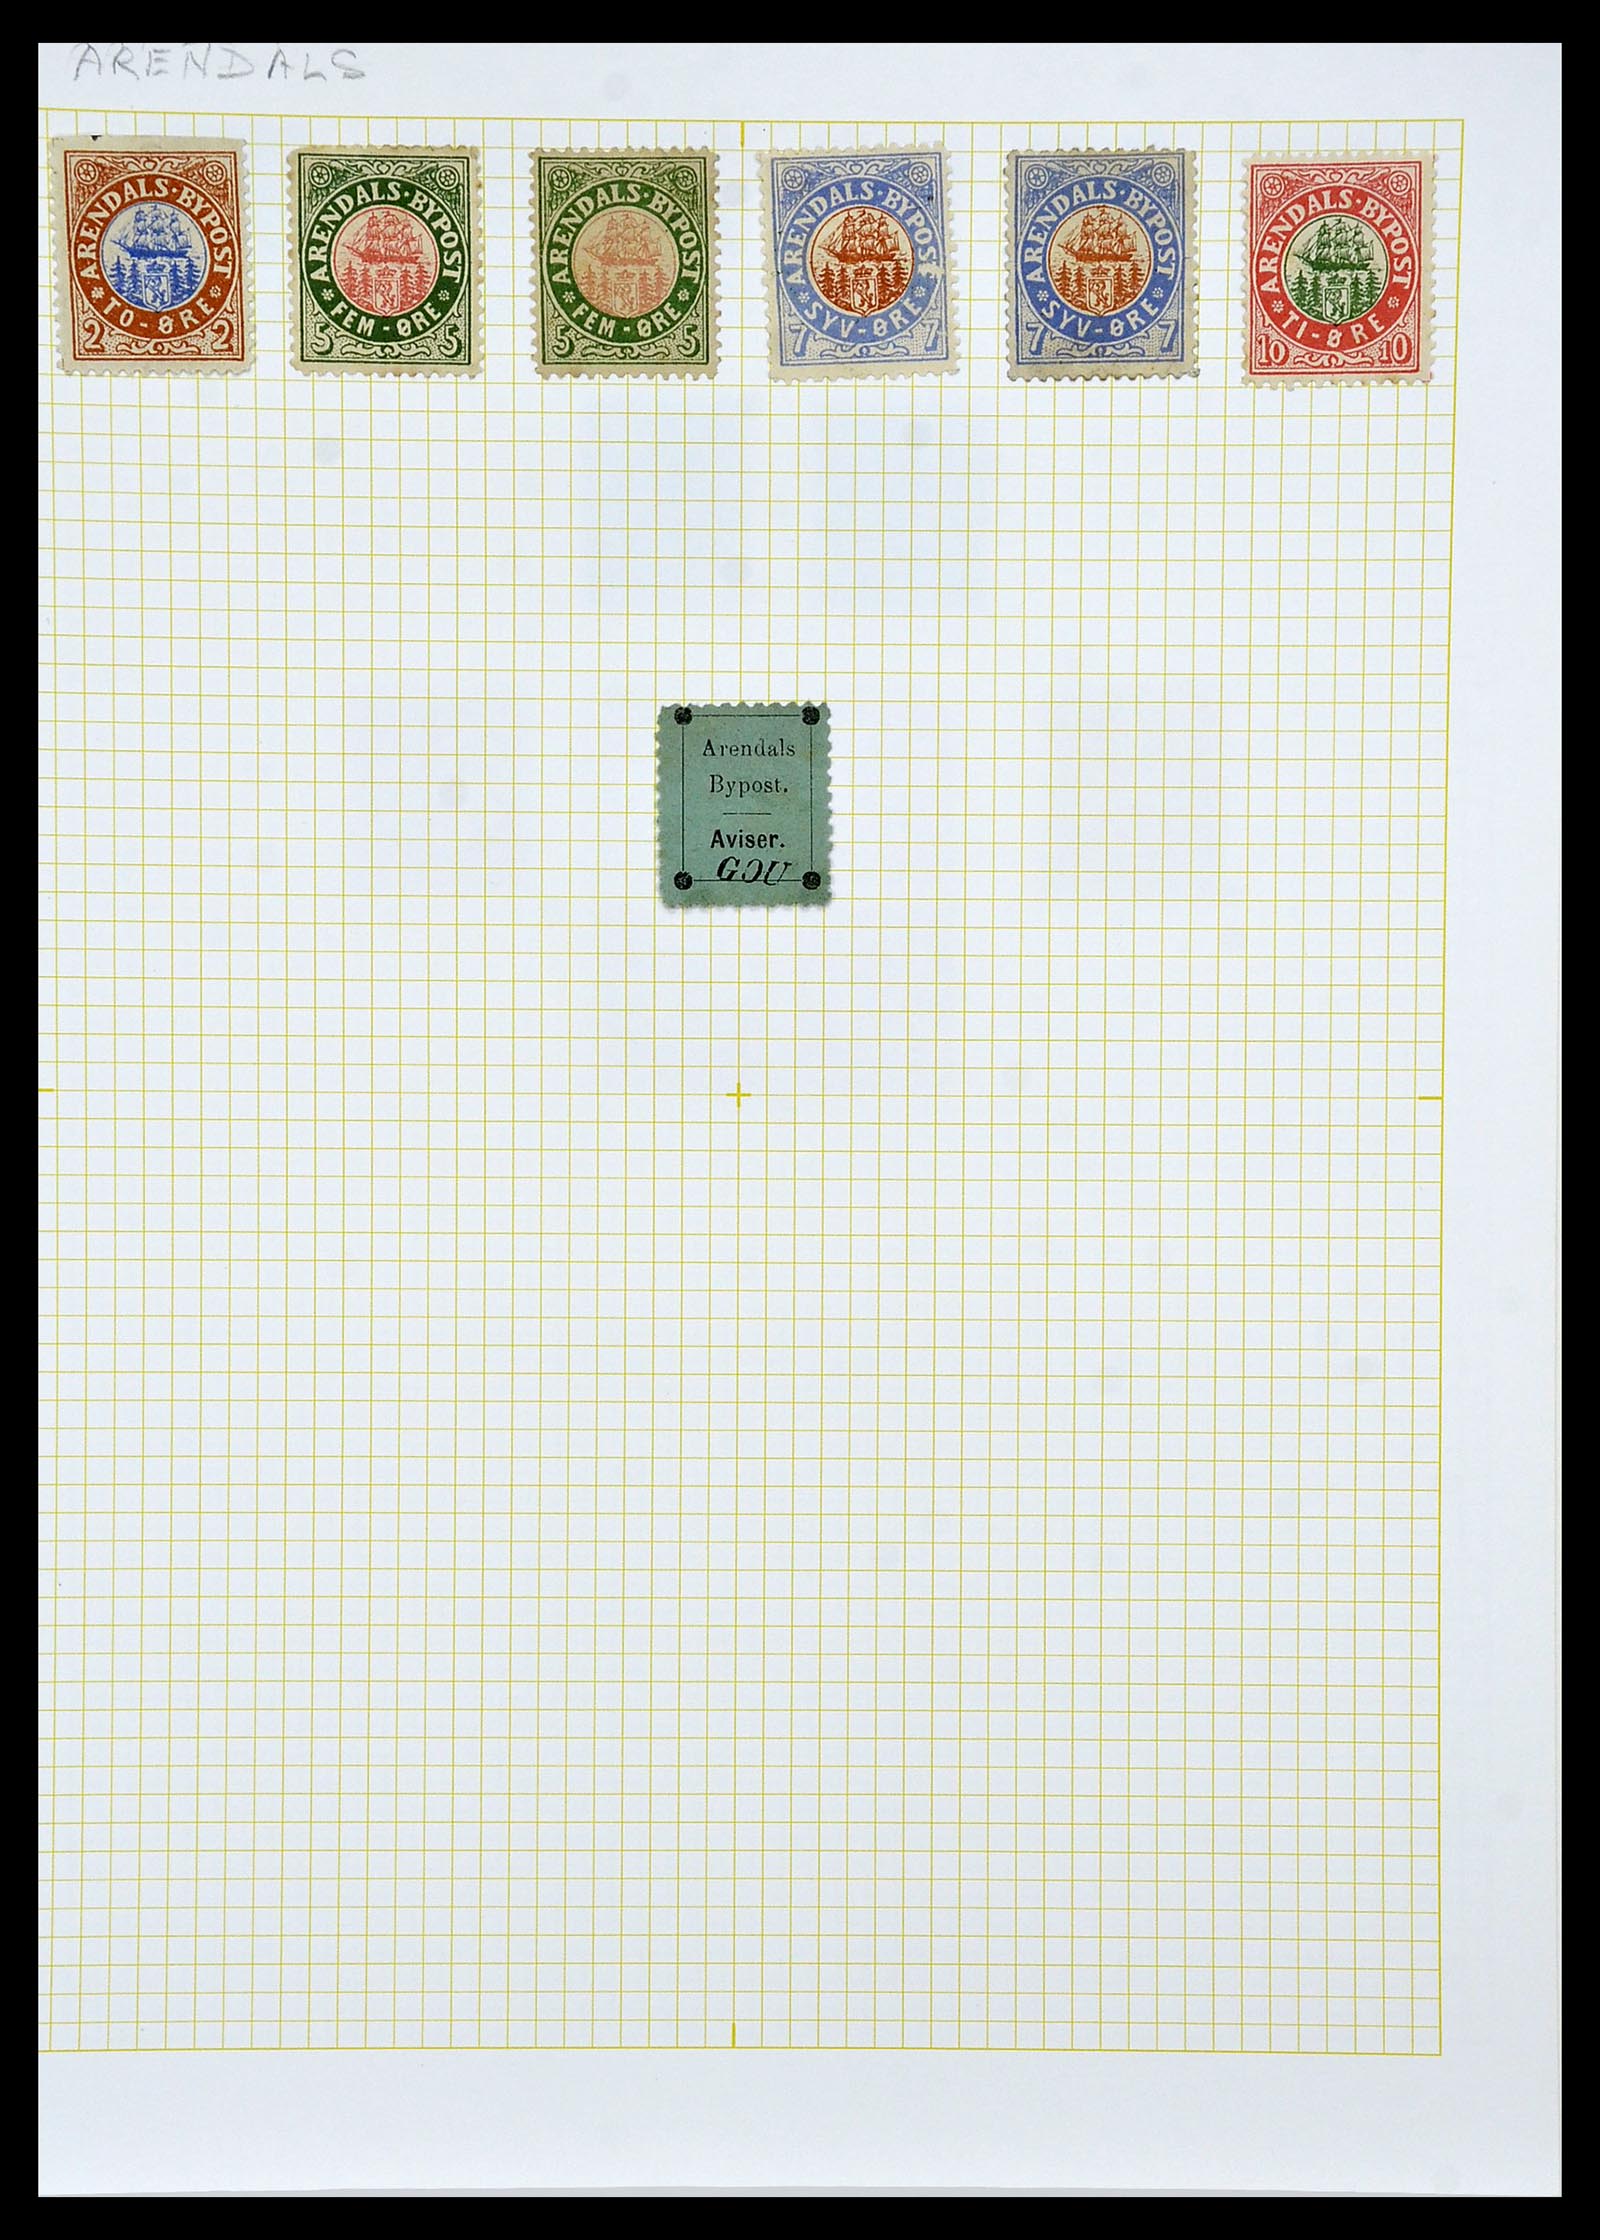 34344 026 - Stamp collection 34344 Scandinavia local post.